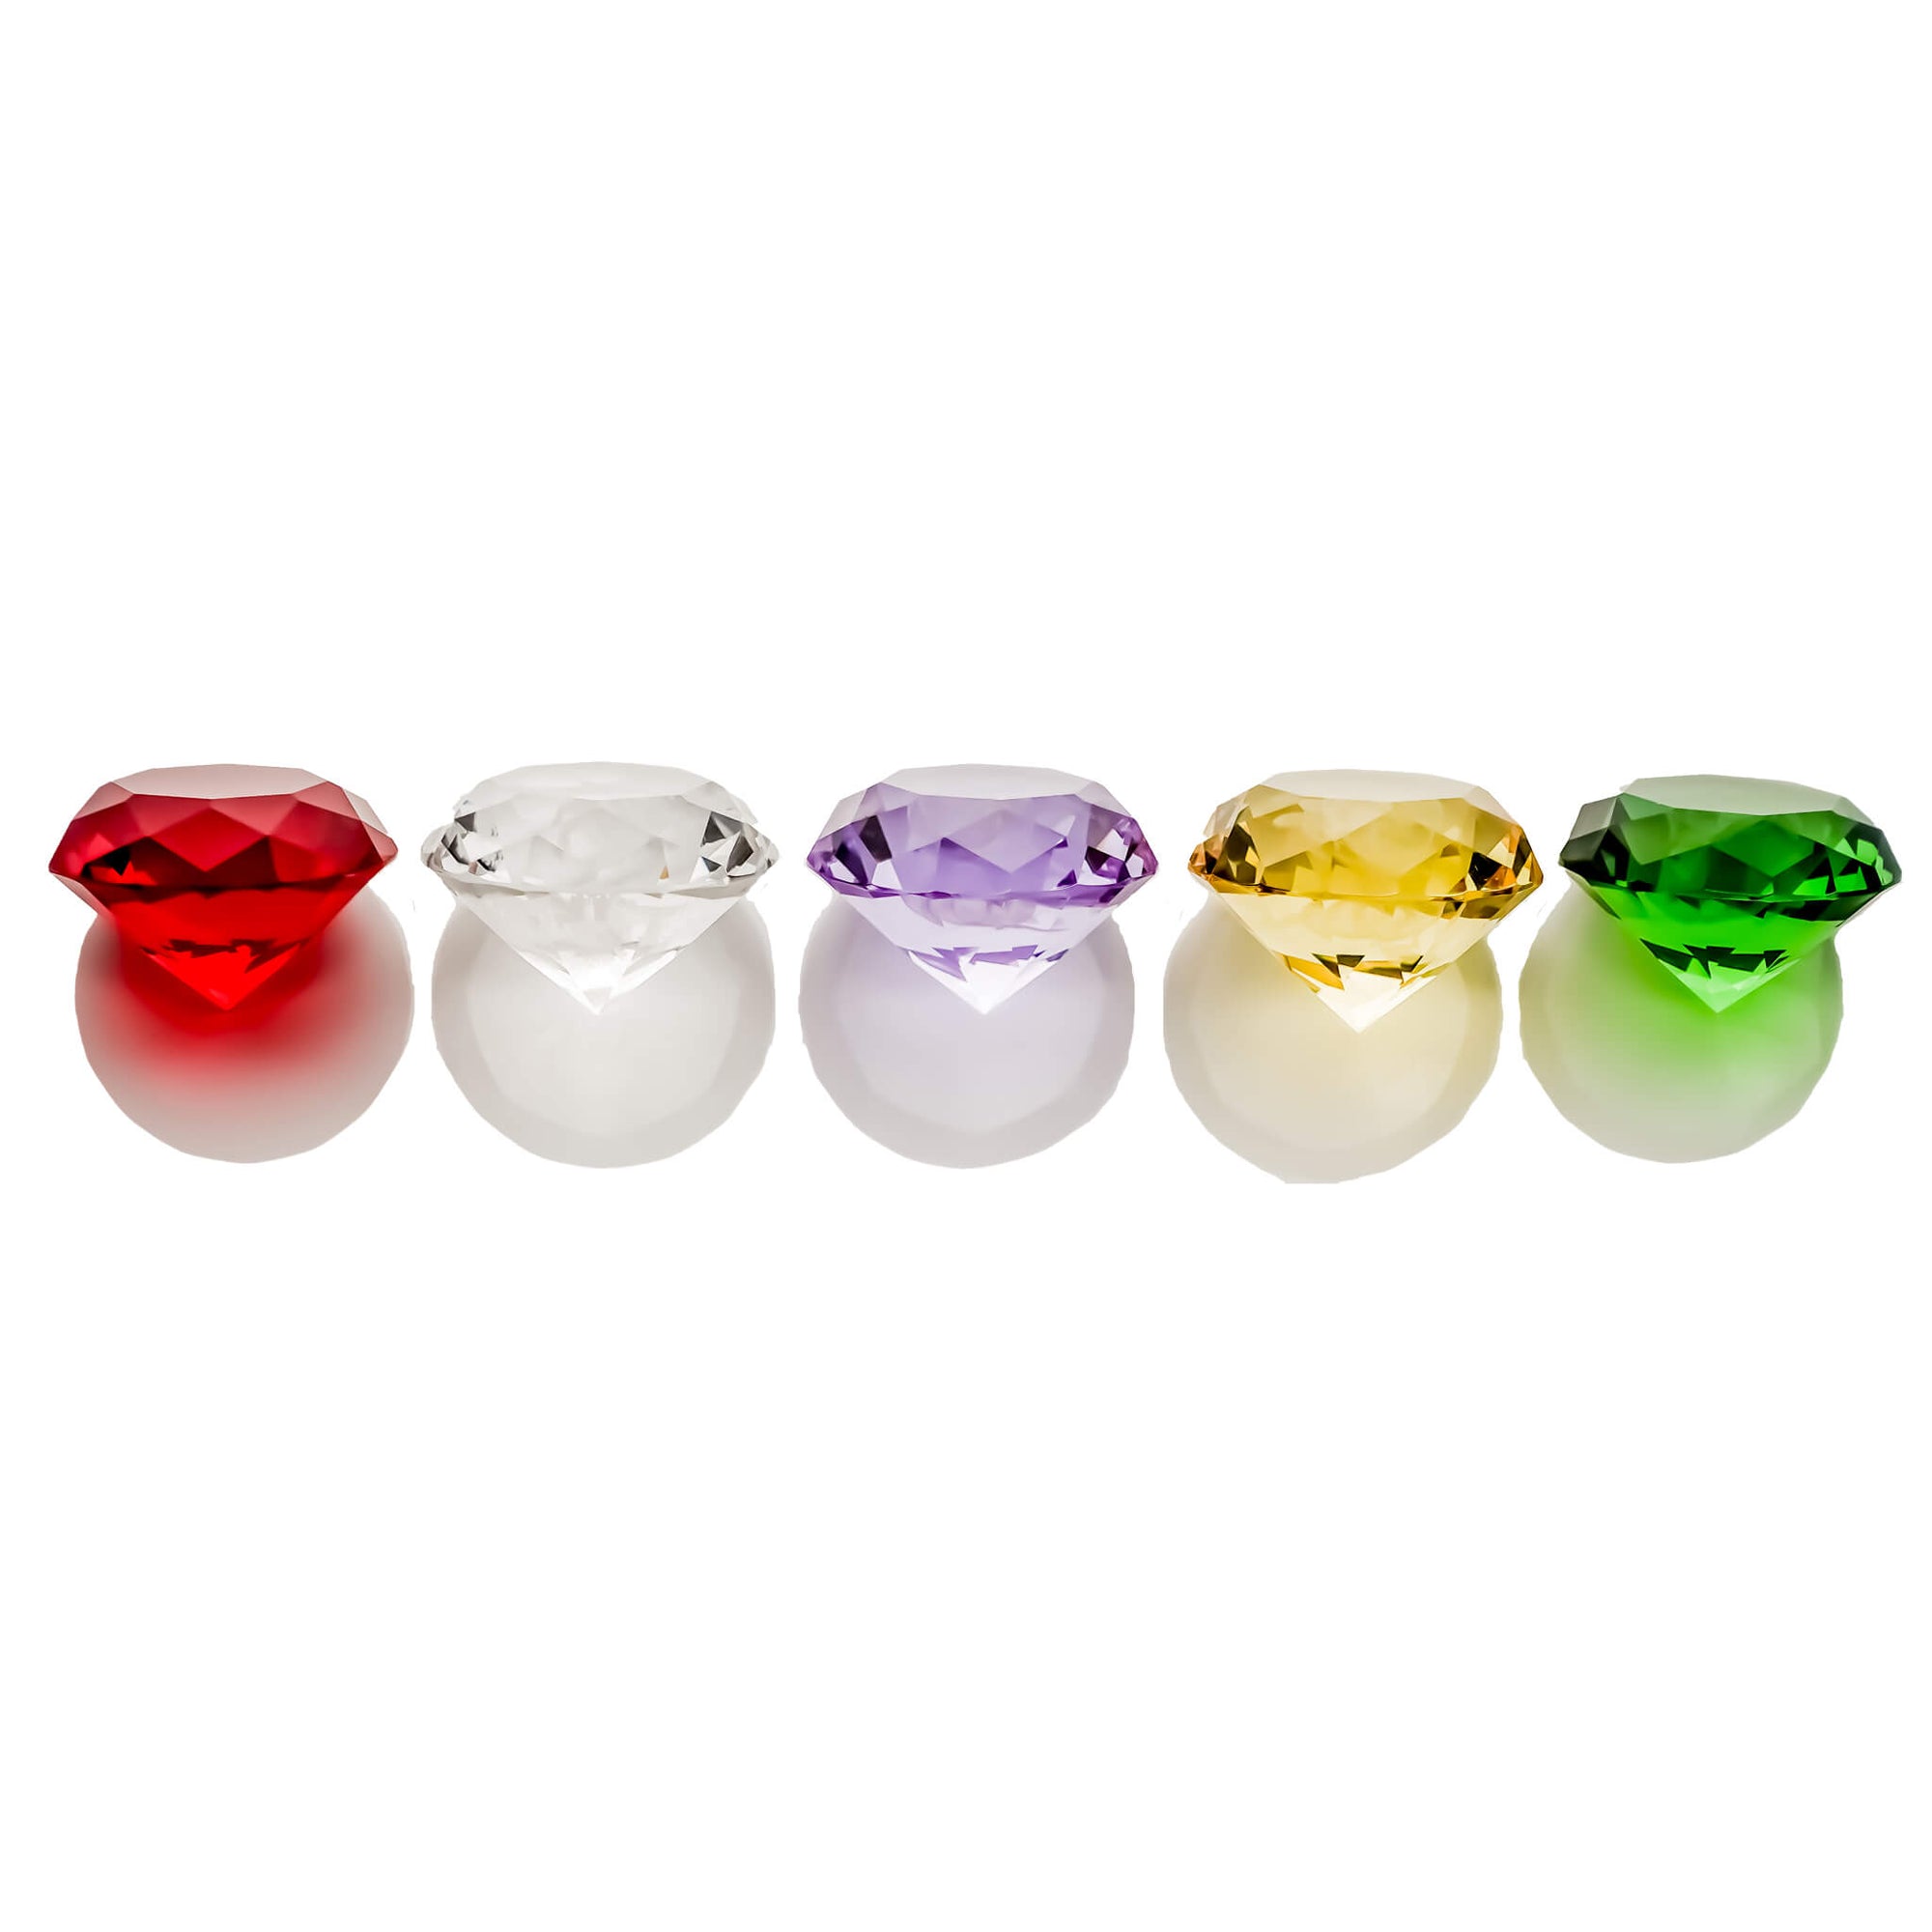 Diamond Cut Carb Cap | All Five Color Variations View | the dabbing specialists